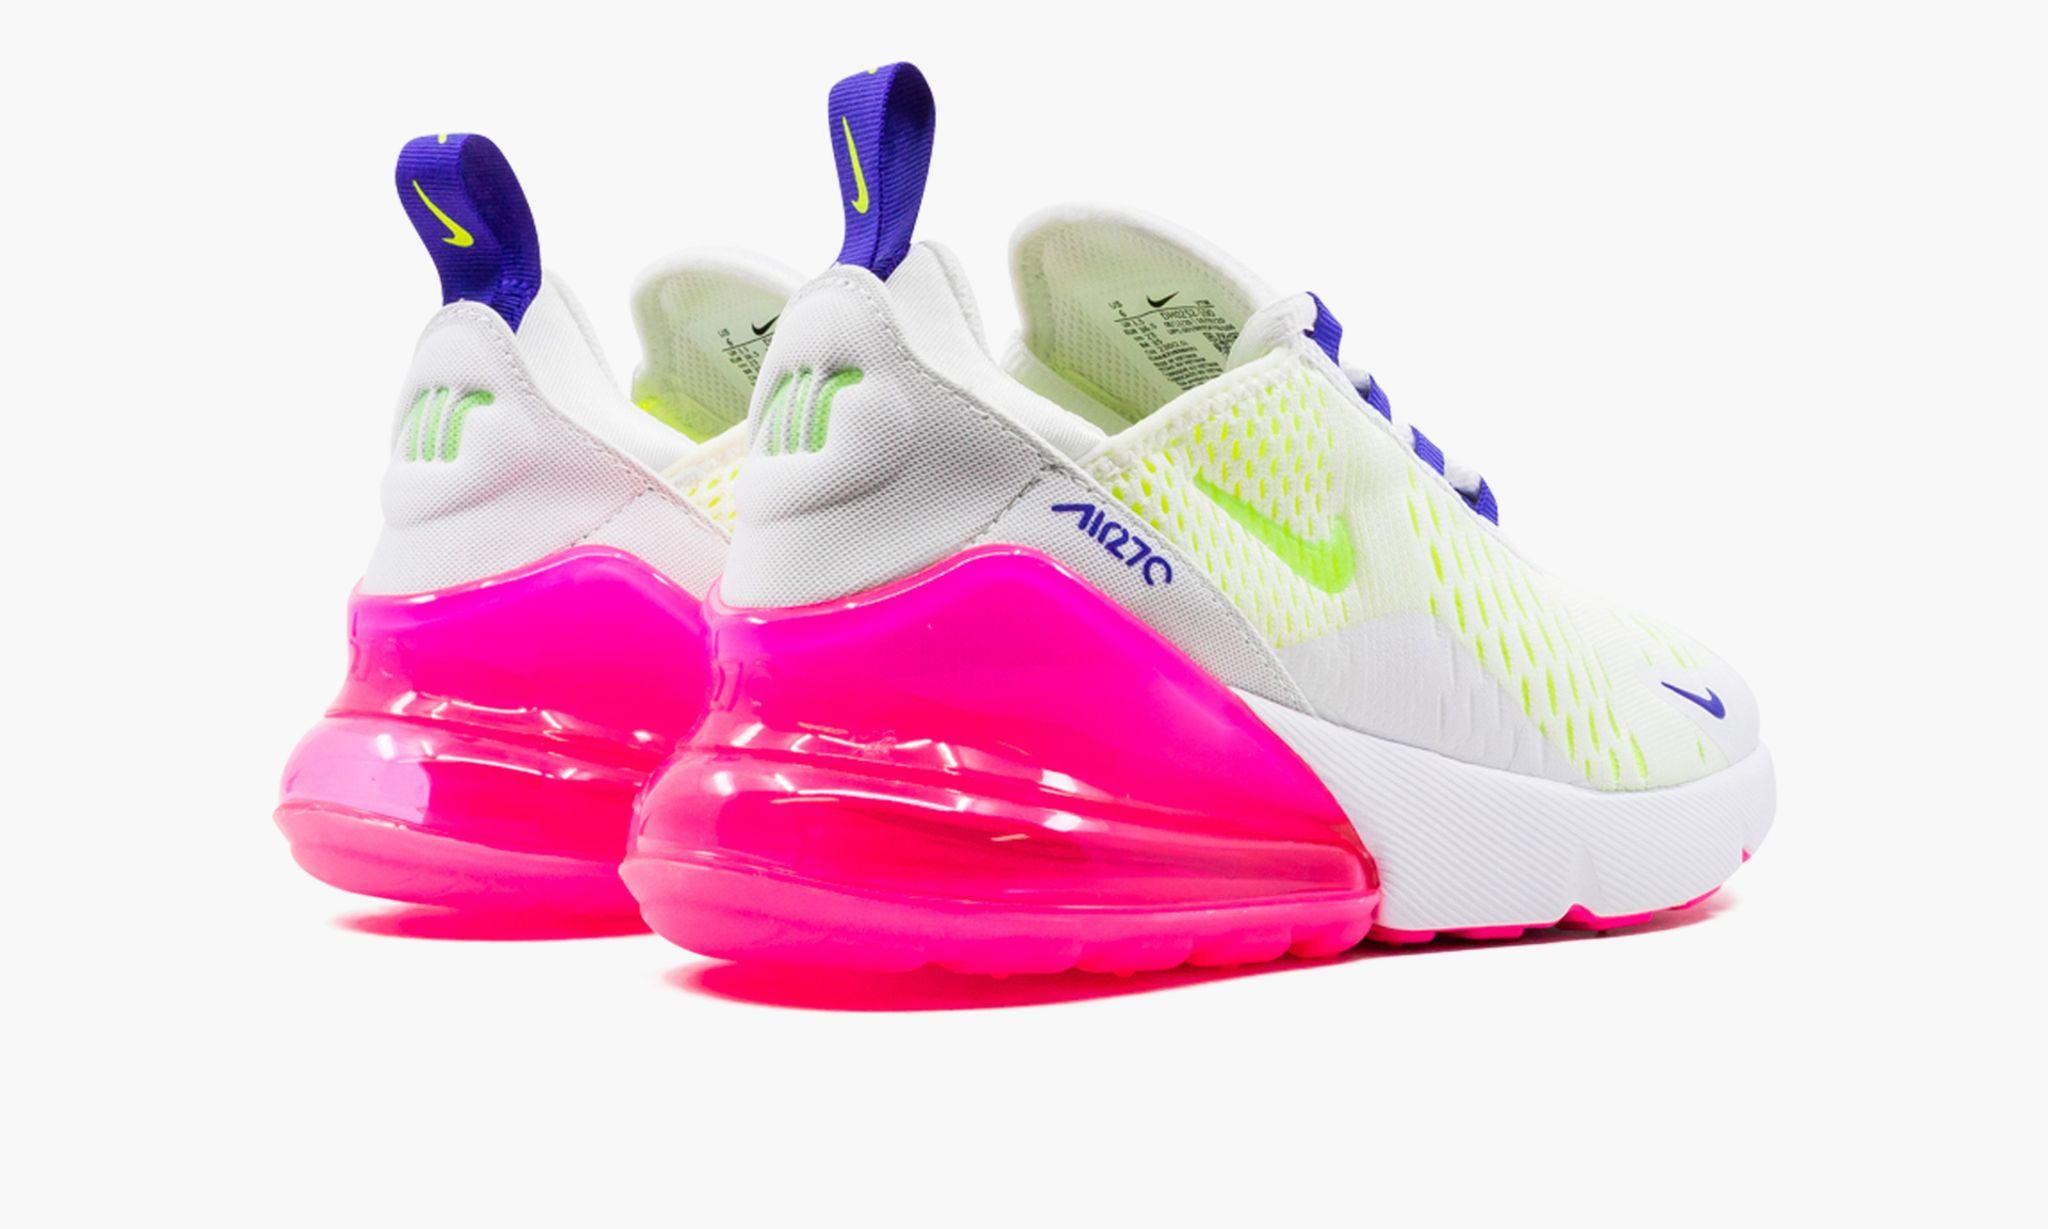 Nike Air Max 270 "white / Pink Blast / Volt" Shoes in Black | Lyst